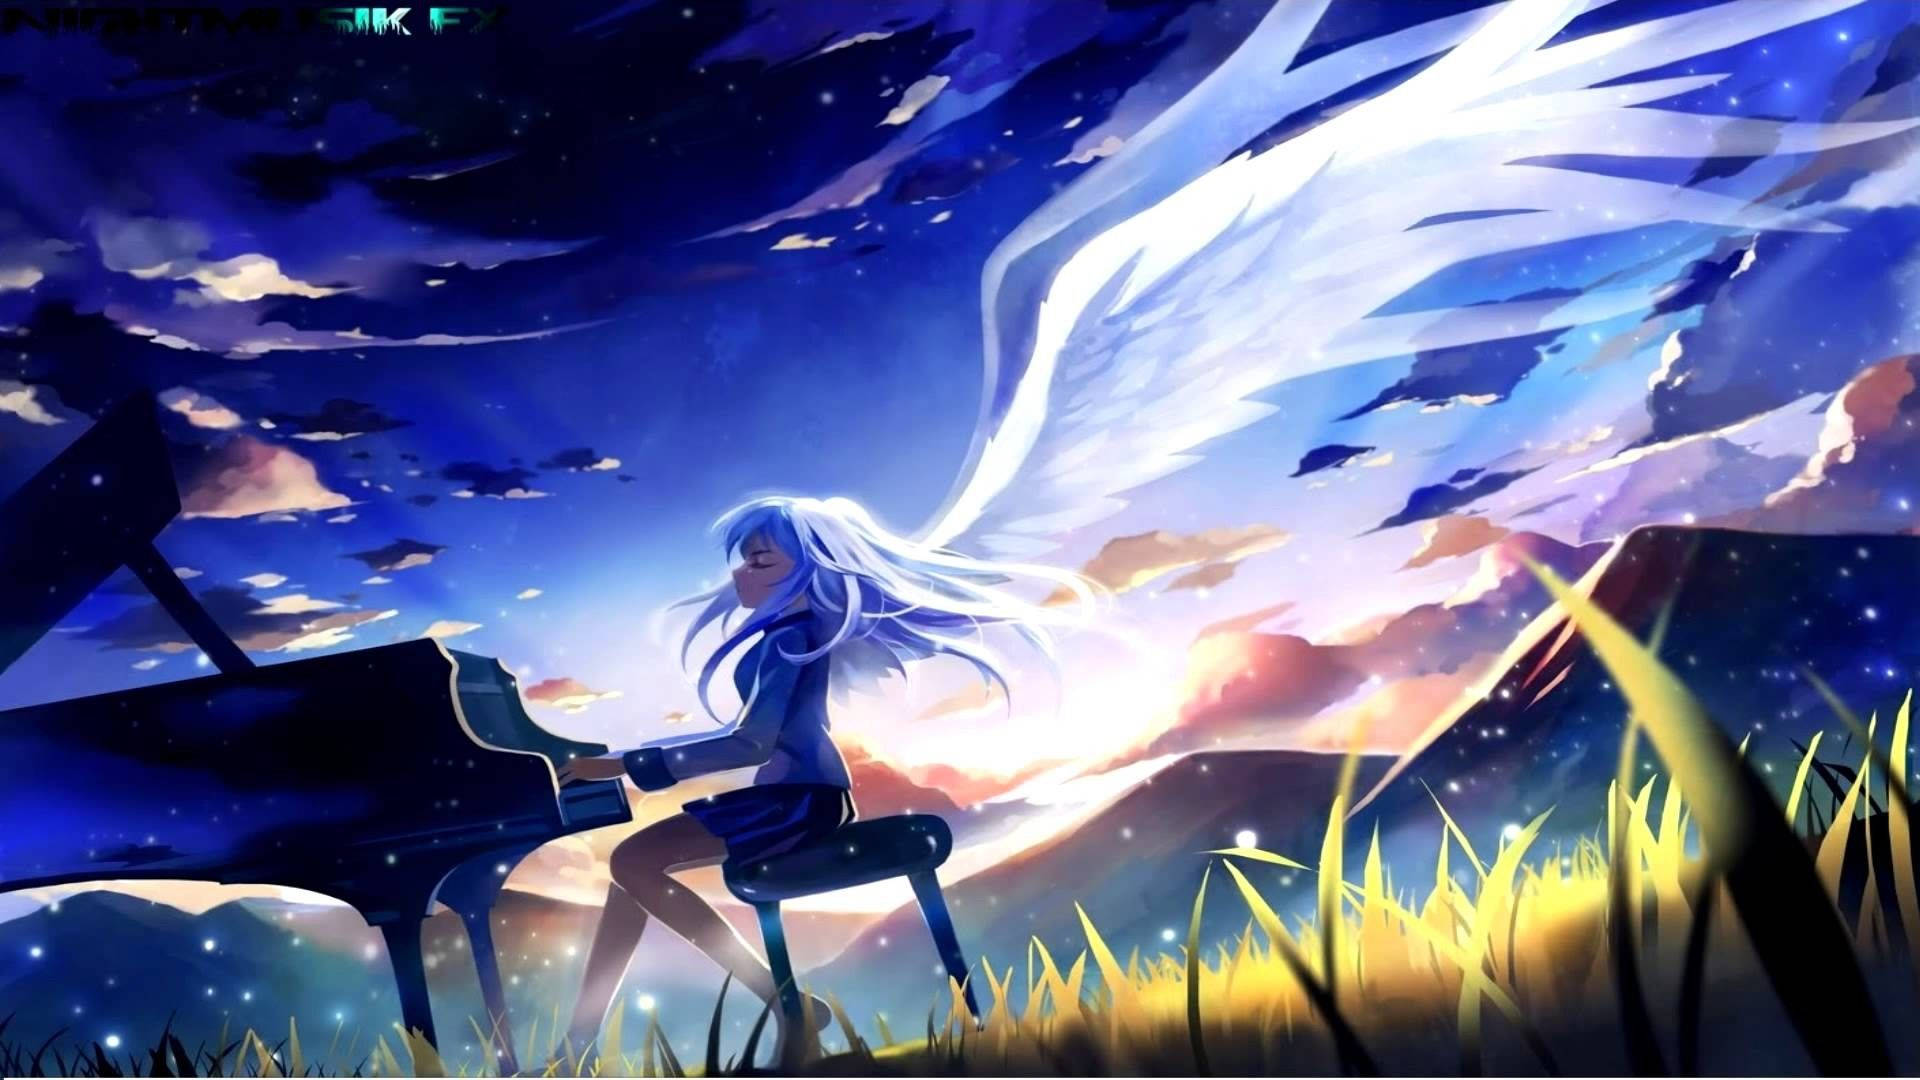 Cool Anime Girl With Wings